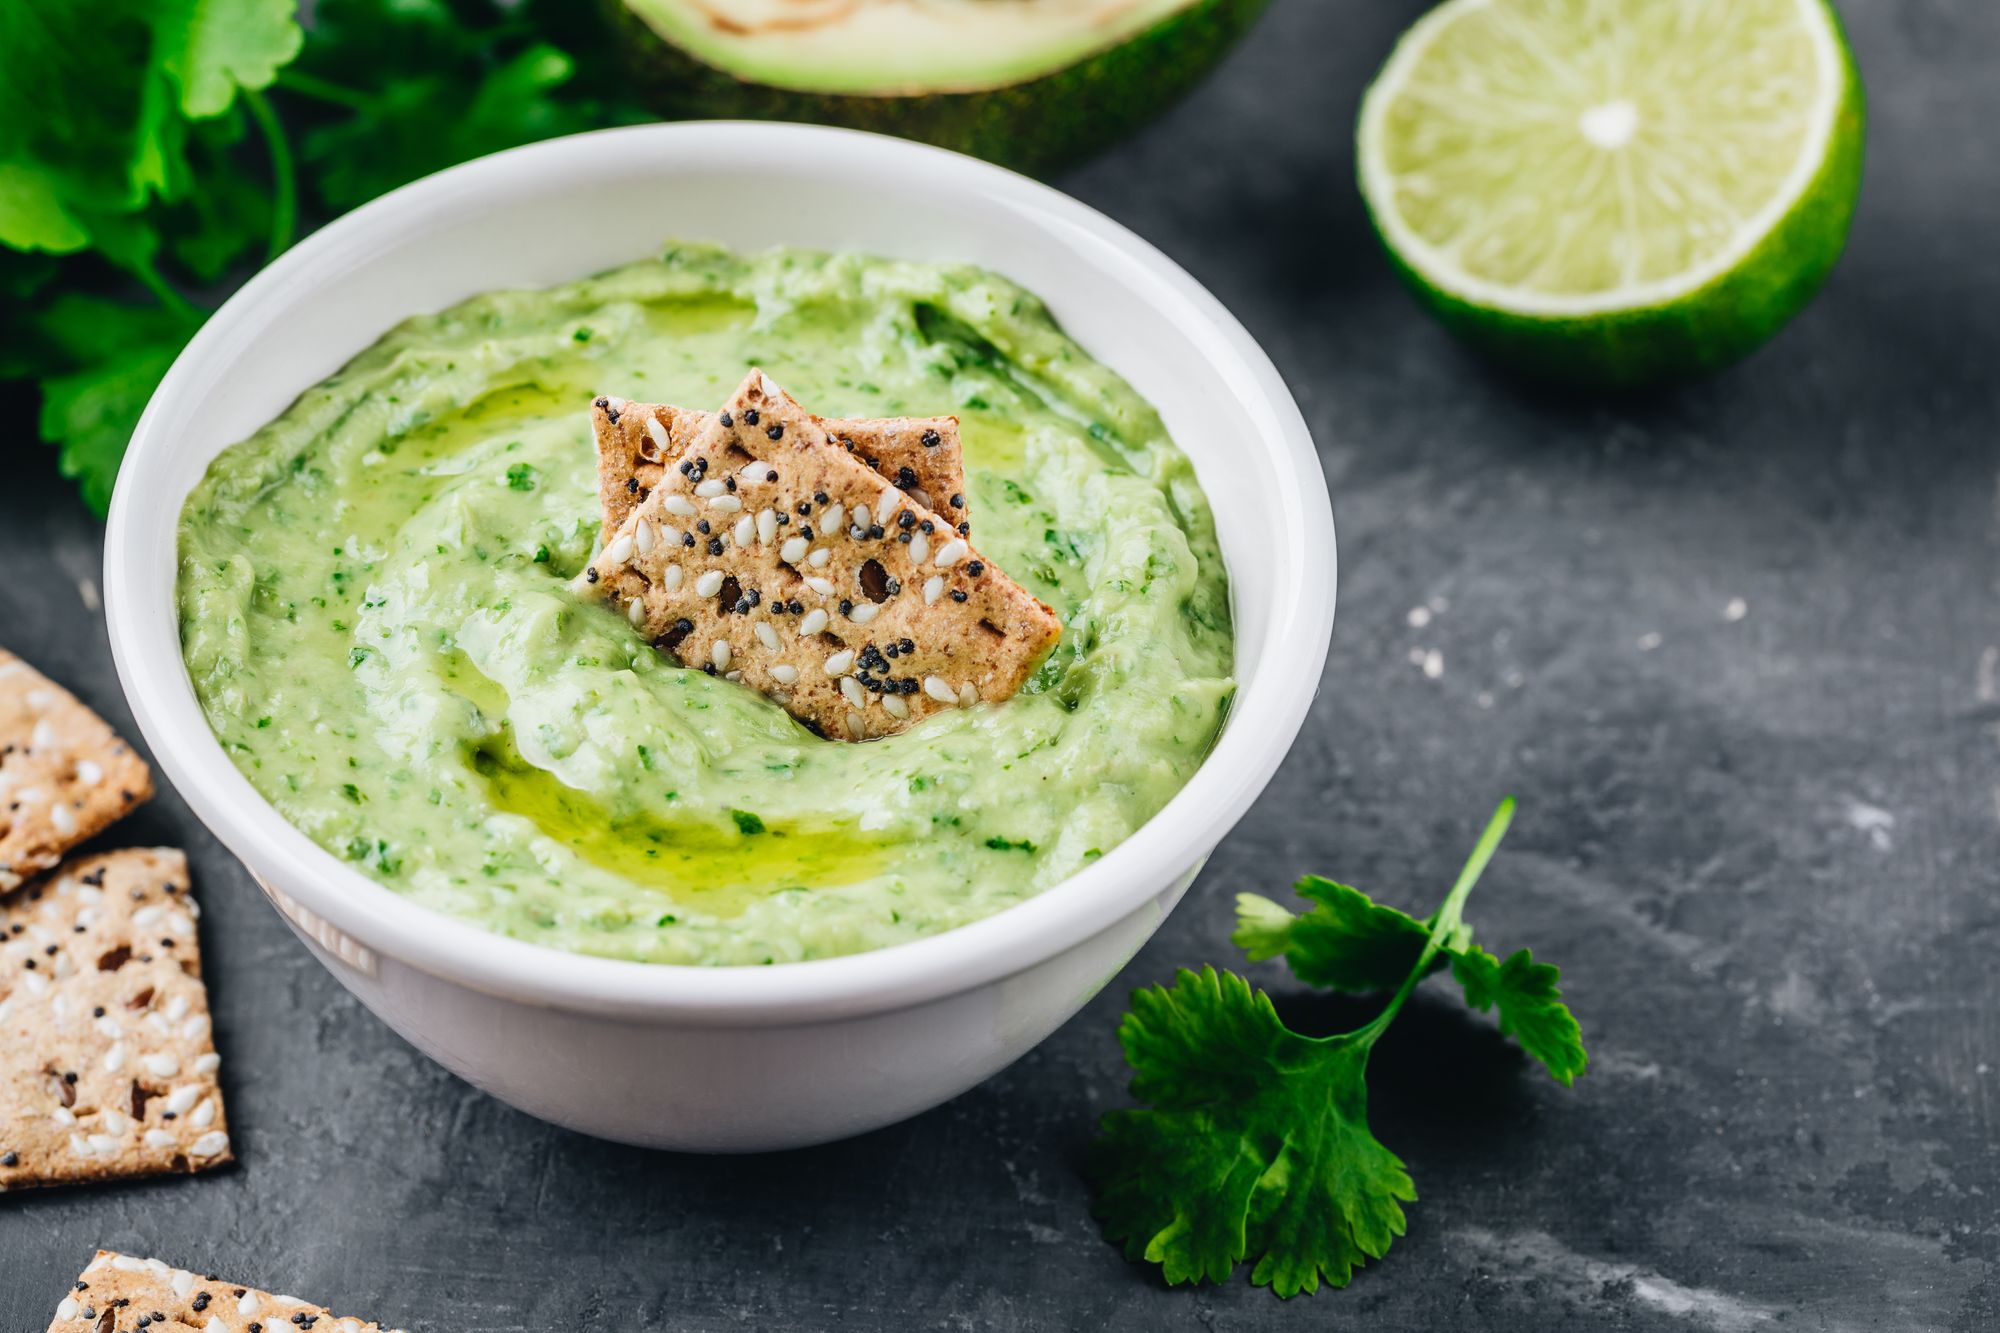 Warm Dip with Avocado and Spinach